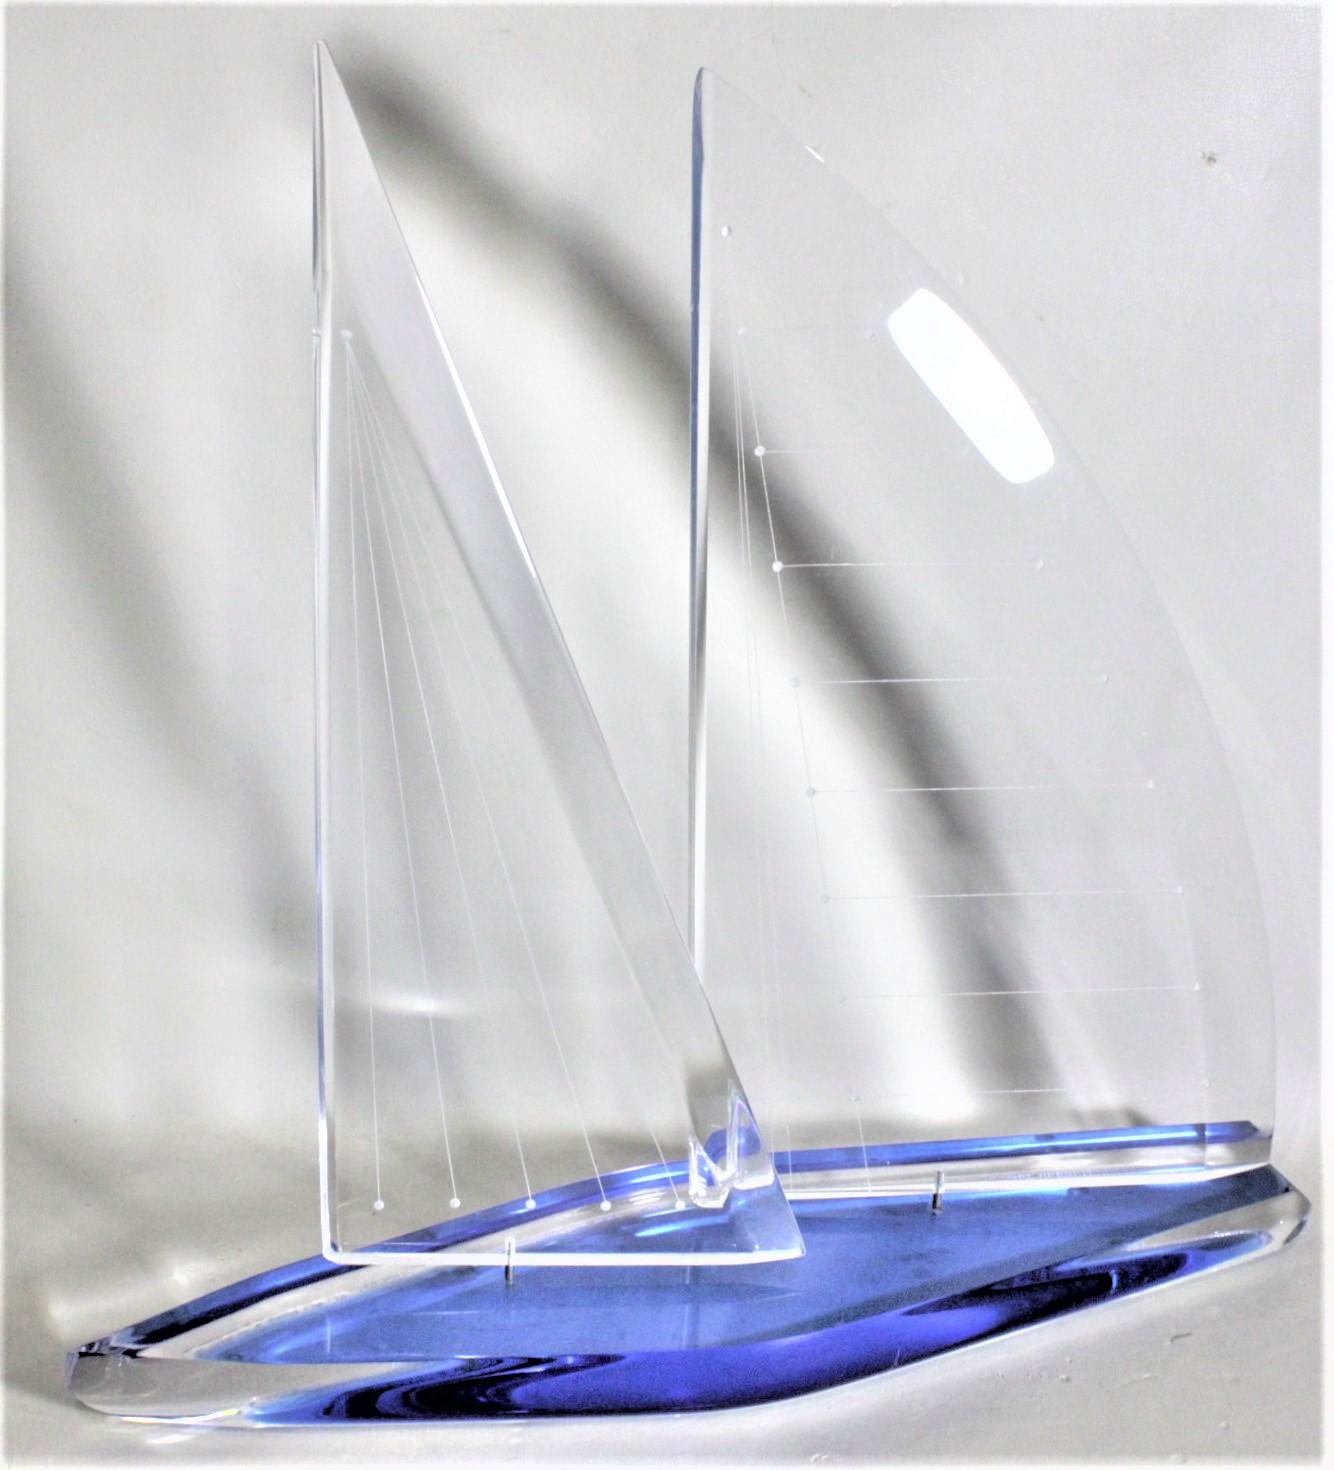 This large solid lucite sailboat sculpture was made by Wintrade of Beverly Hills California in approximately 1980 in a Mid Century Modern style. The sculpture is done with clear lucite with a cobalt blue covering on the base, with aluminum brackets